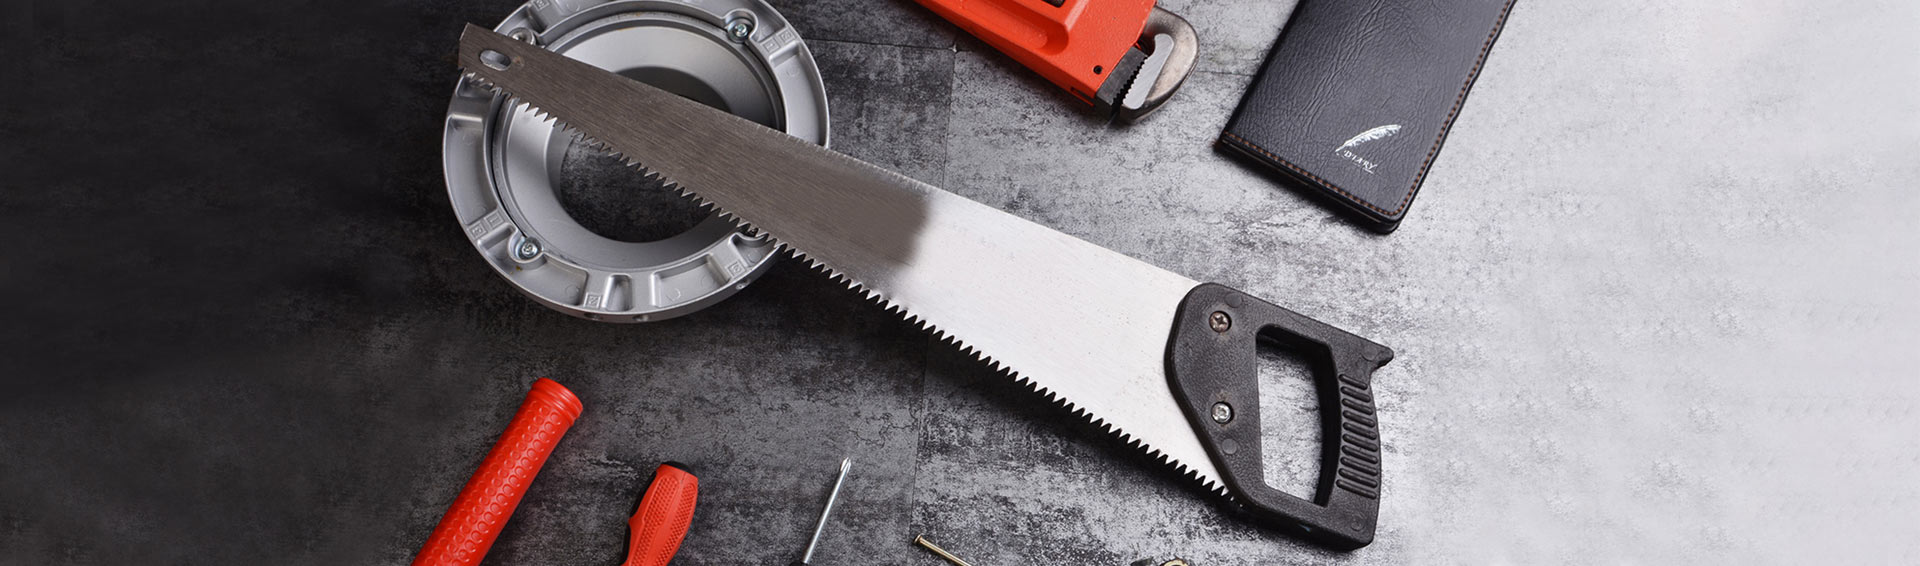 Who makes the new Craftsman chainsaw?